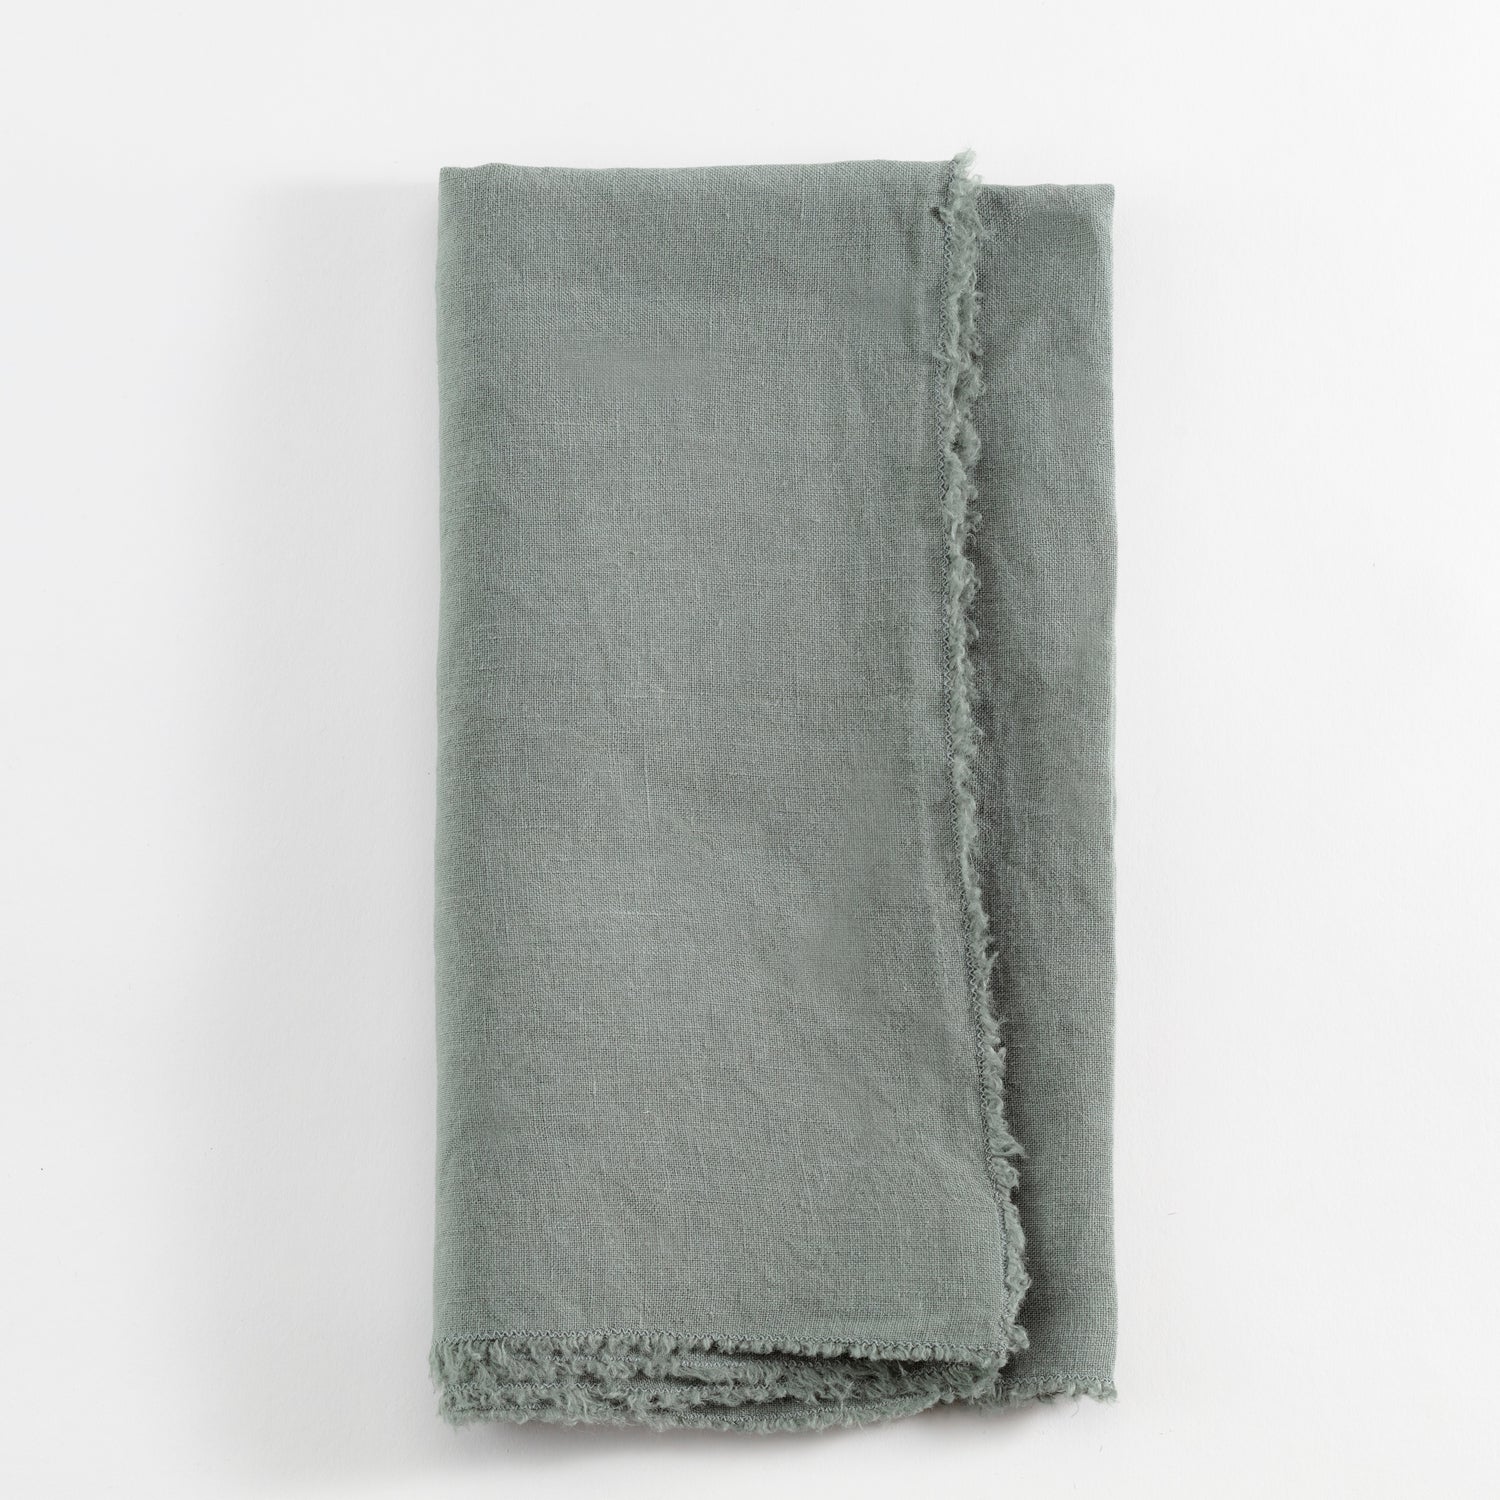 Frayed linen cloth in muted green or gray with rustic charm.